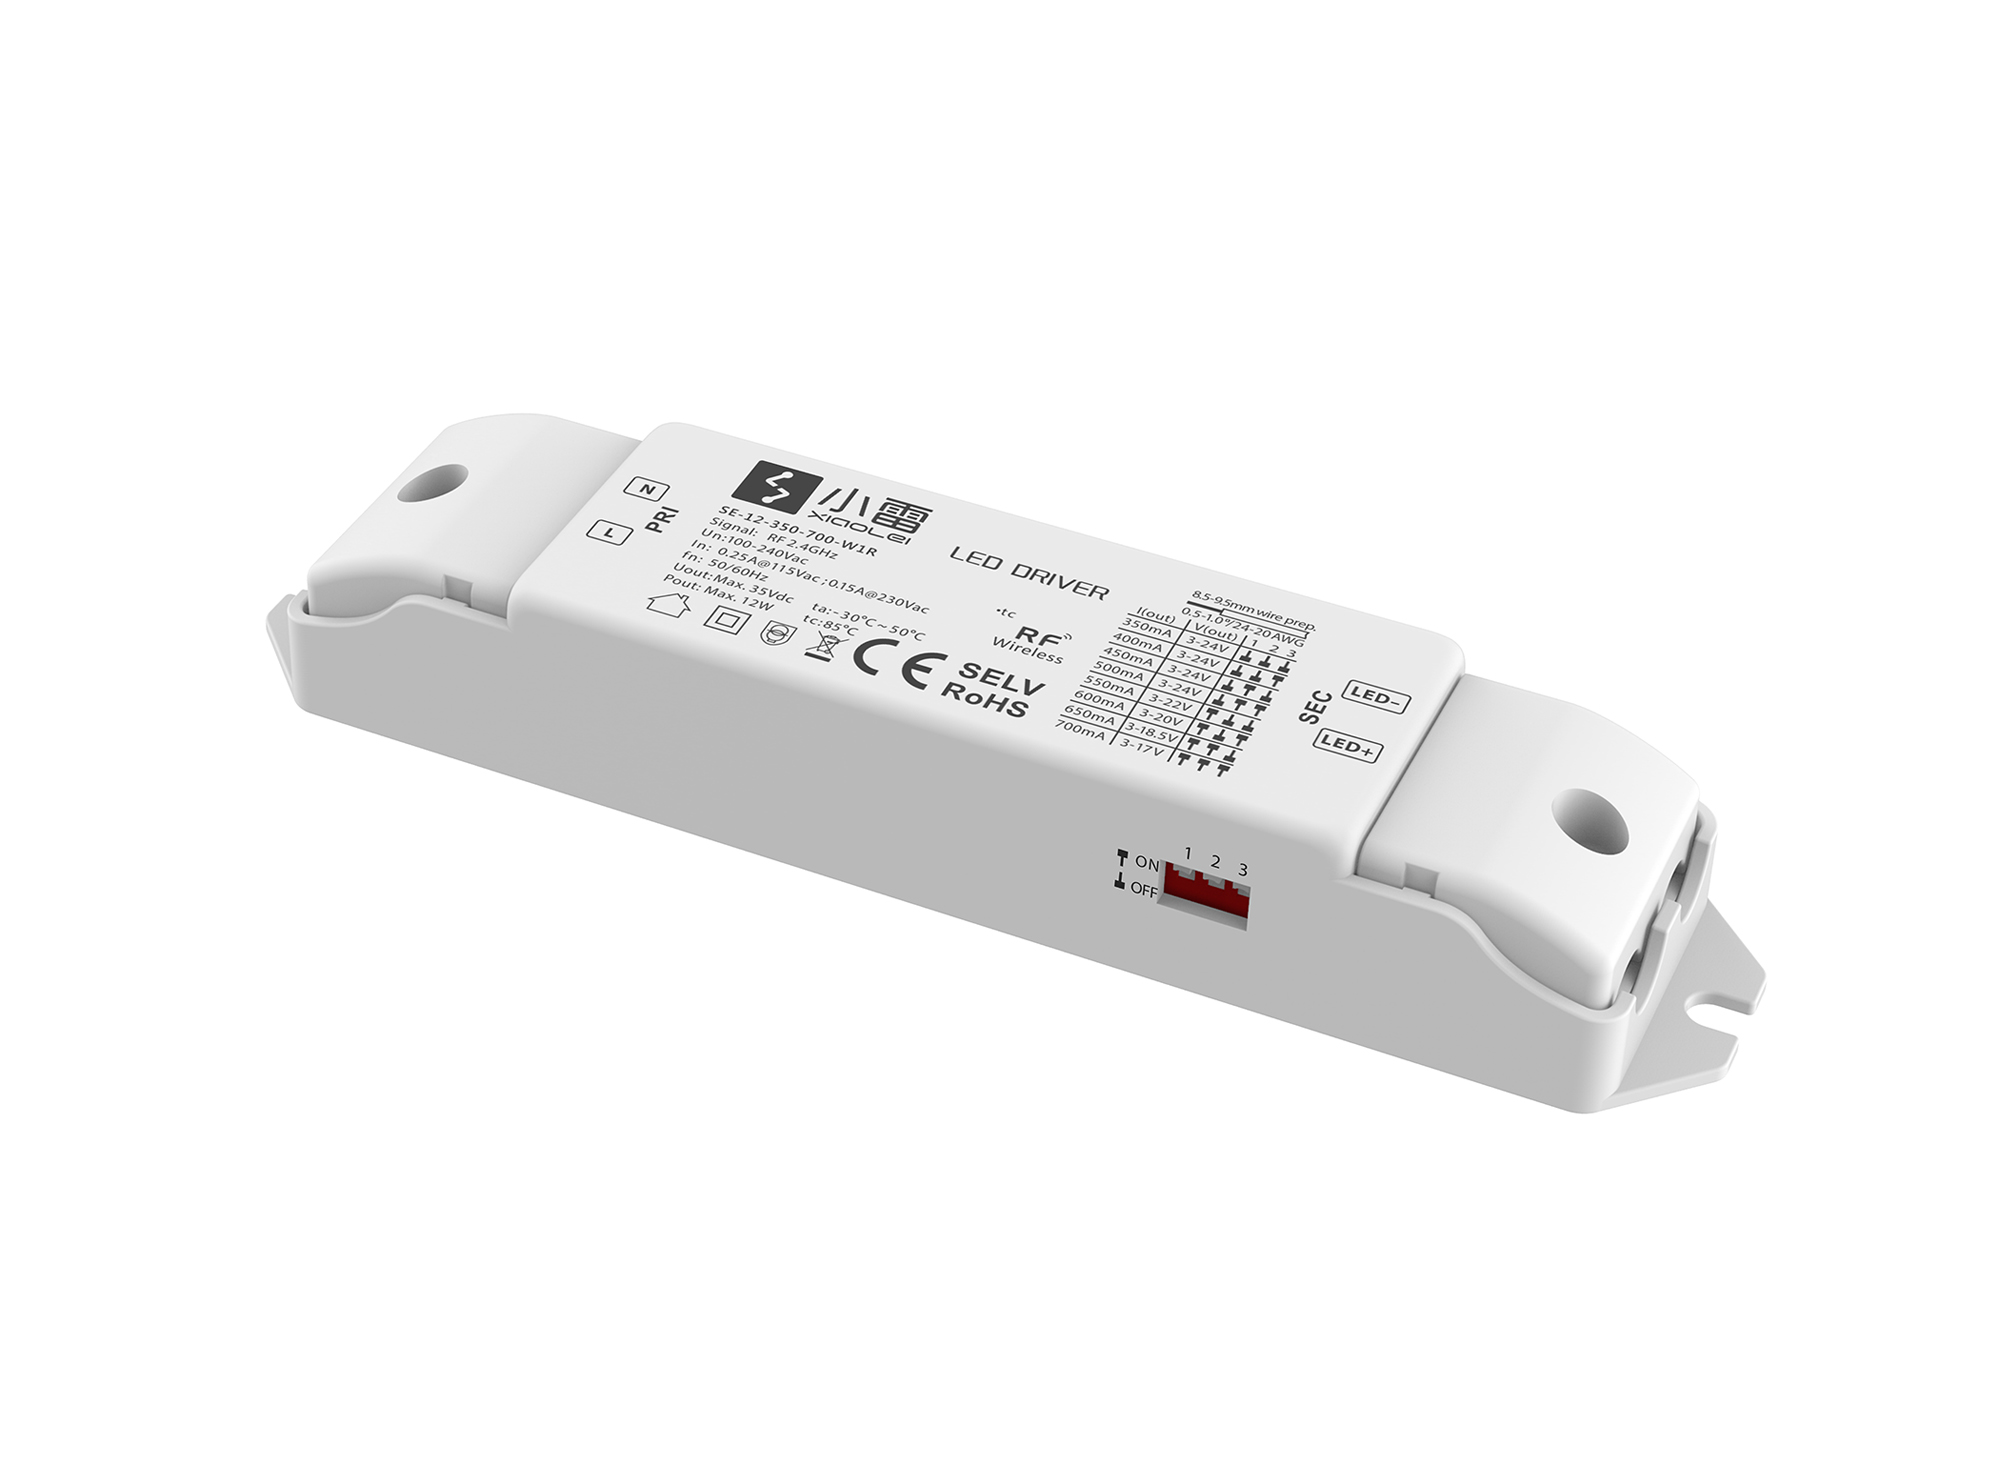 SE-12-350-700-W1R  Ltech Smart home Wireless Dimmablre LED Driver 12W 24Vdc/350-700mA. 0-100% PWM dimming, Over voltage, over load, Over heat and Short circuit protection, IP20.